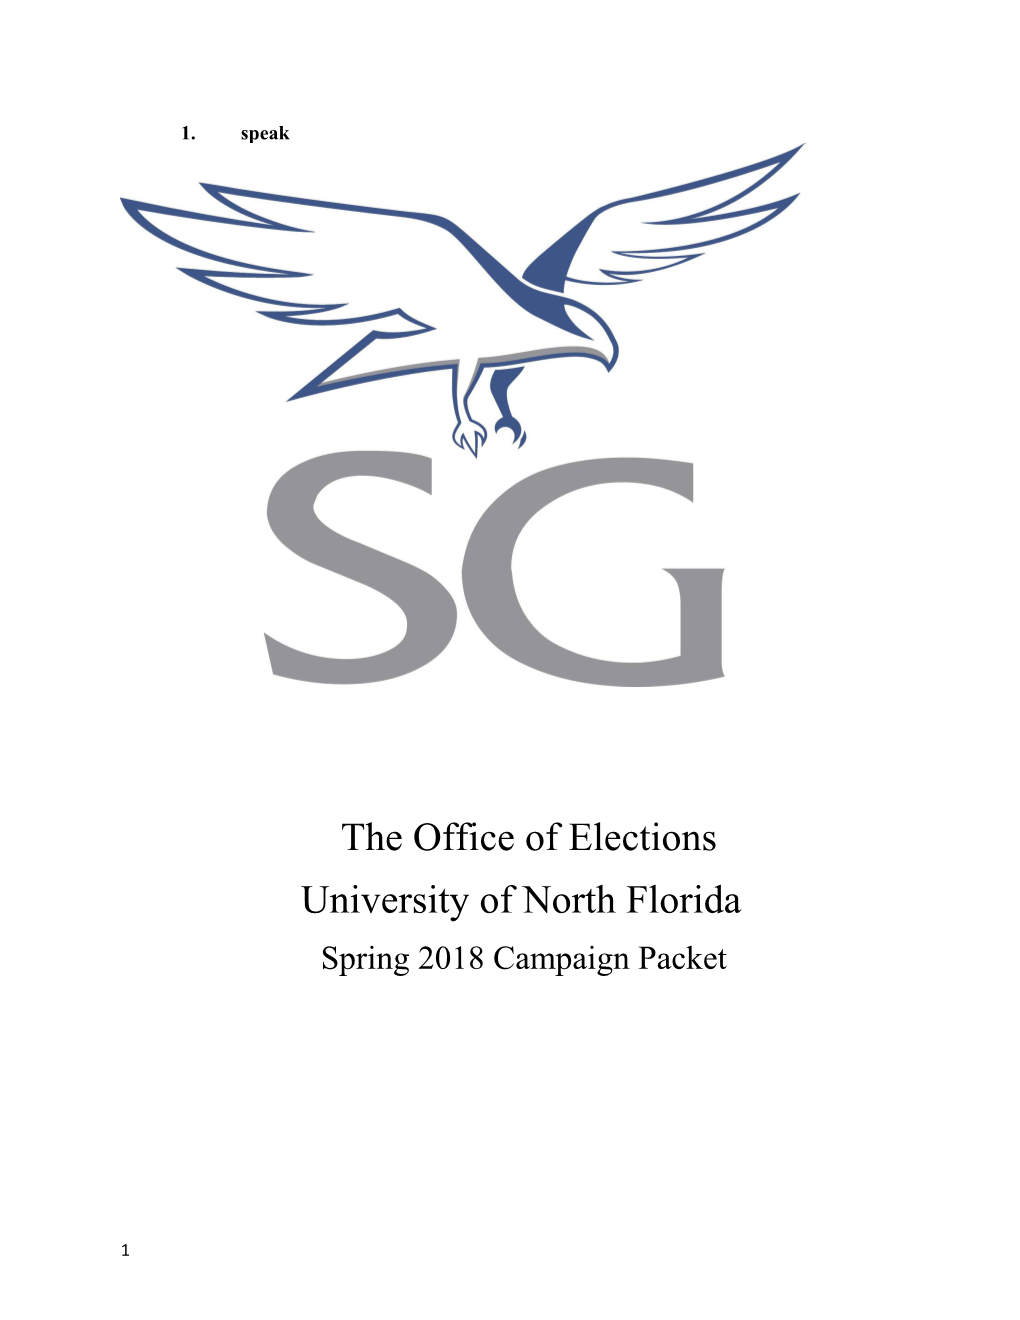 The Office of Elections